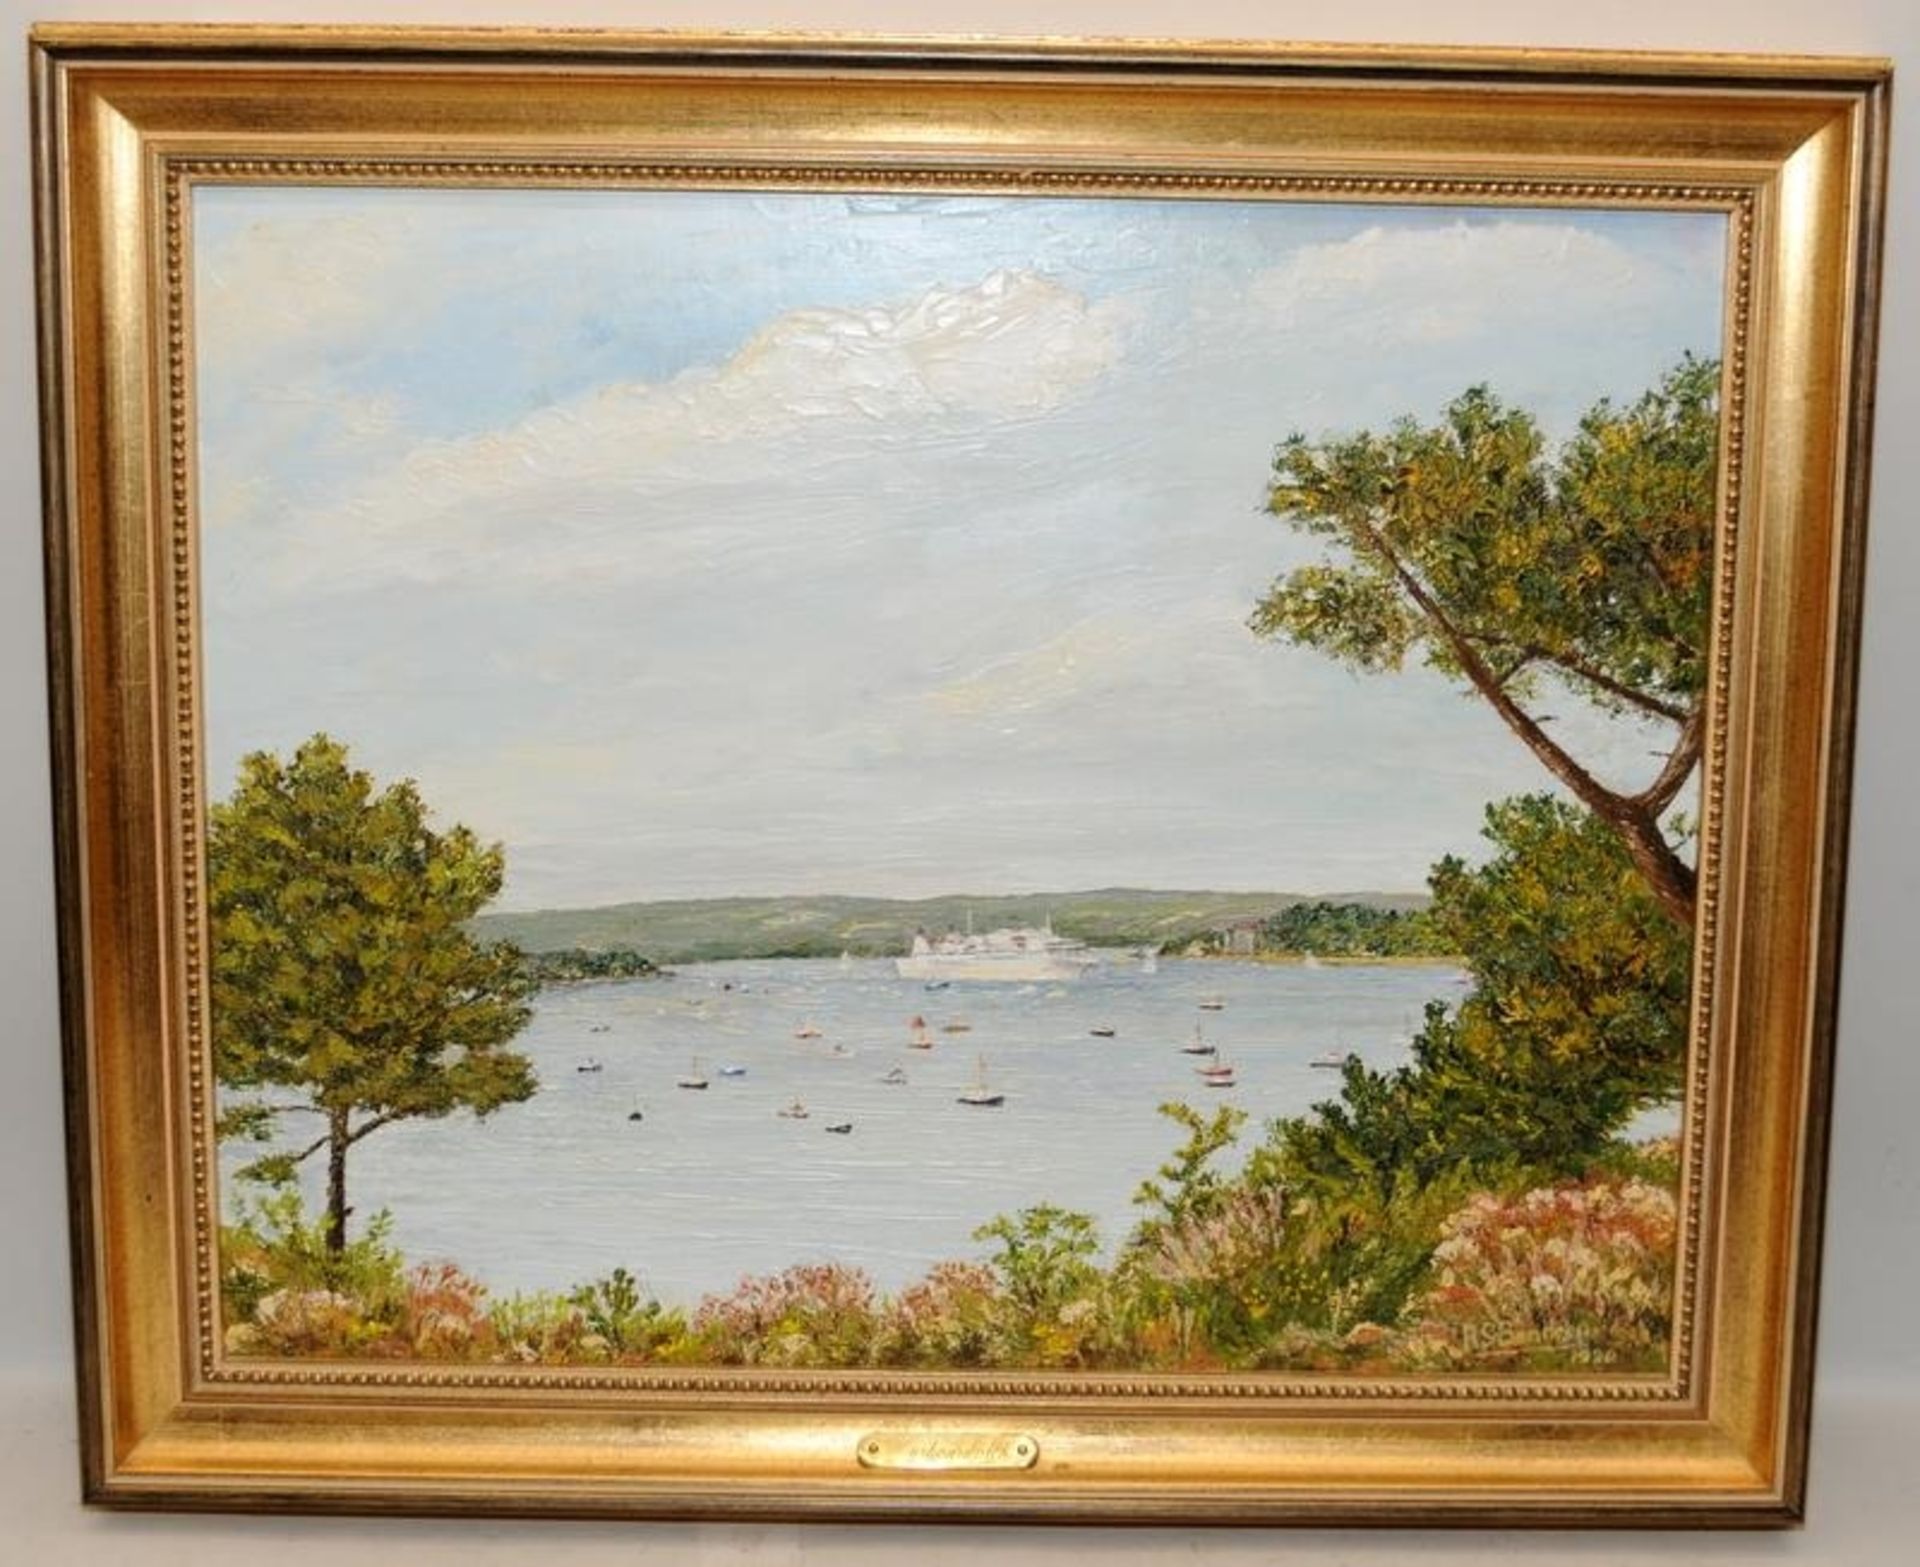 Local interest: Framed oil painting 'Harbour Watch'. Poole Harbour as viewed from Evening Hill